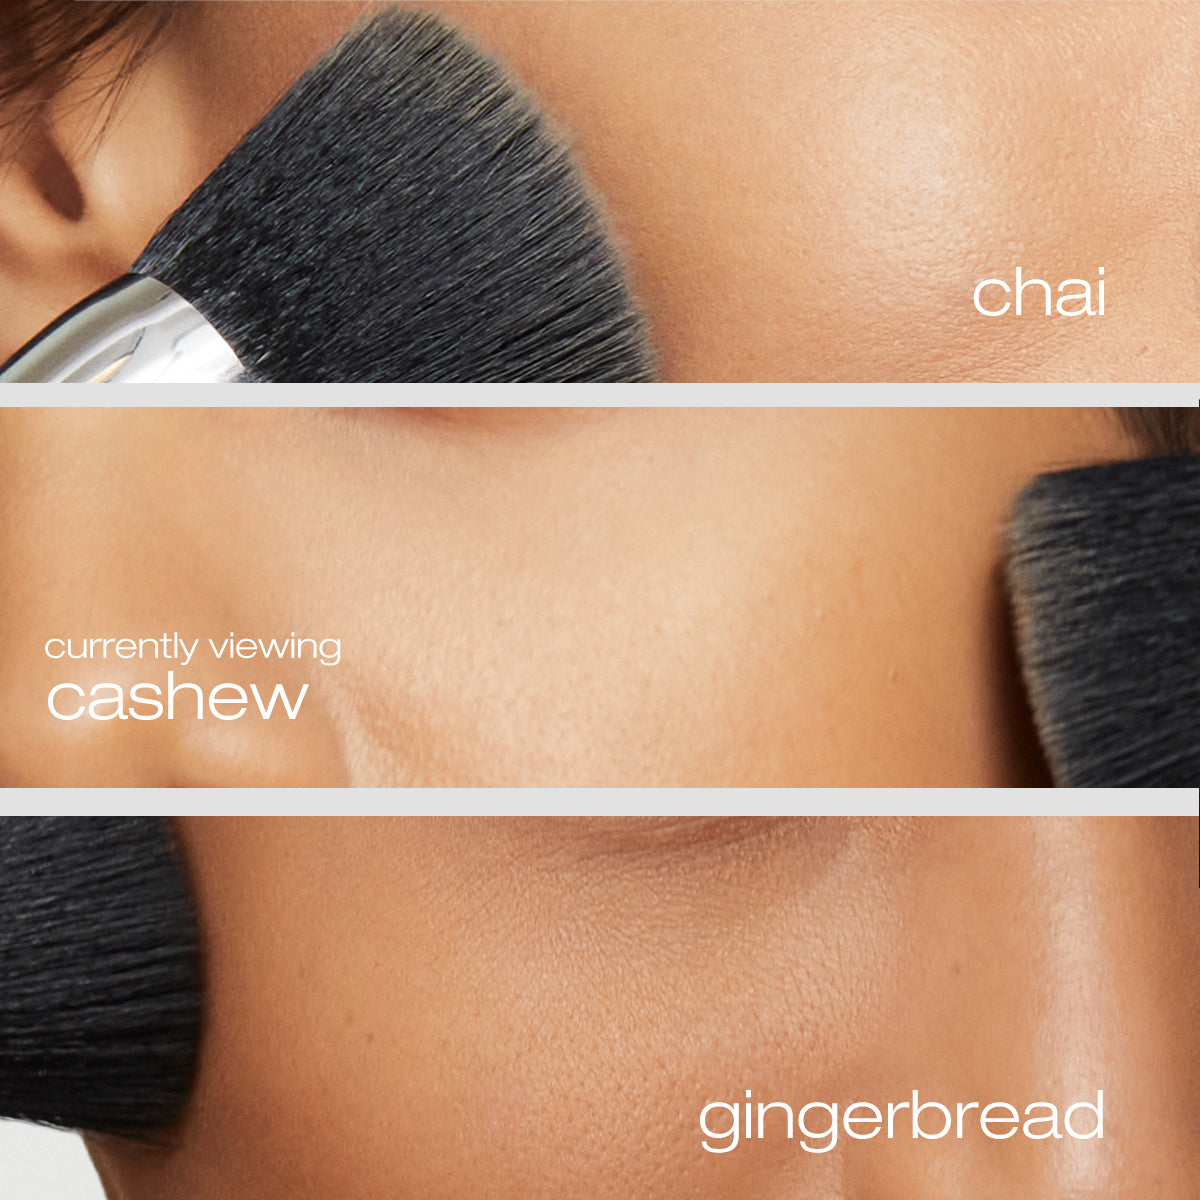 Model applying chai, cashew, and gingerbread foundation on cheeks